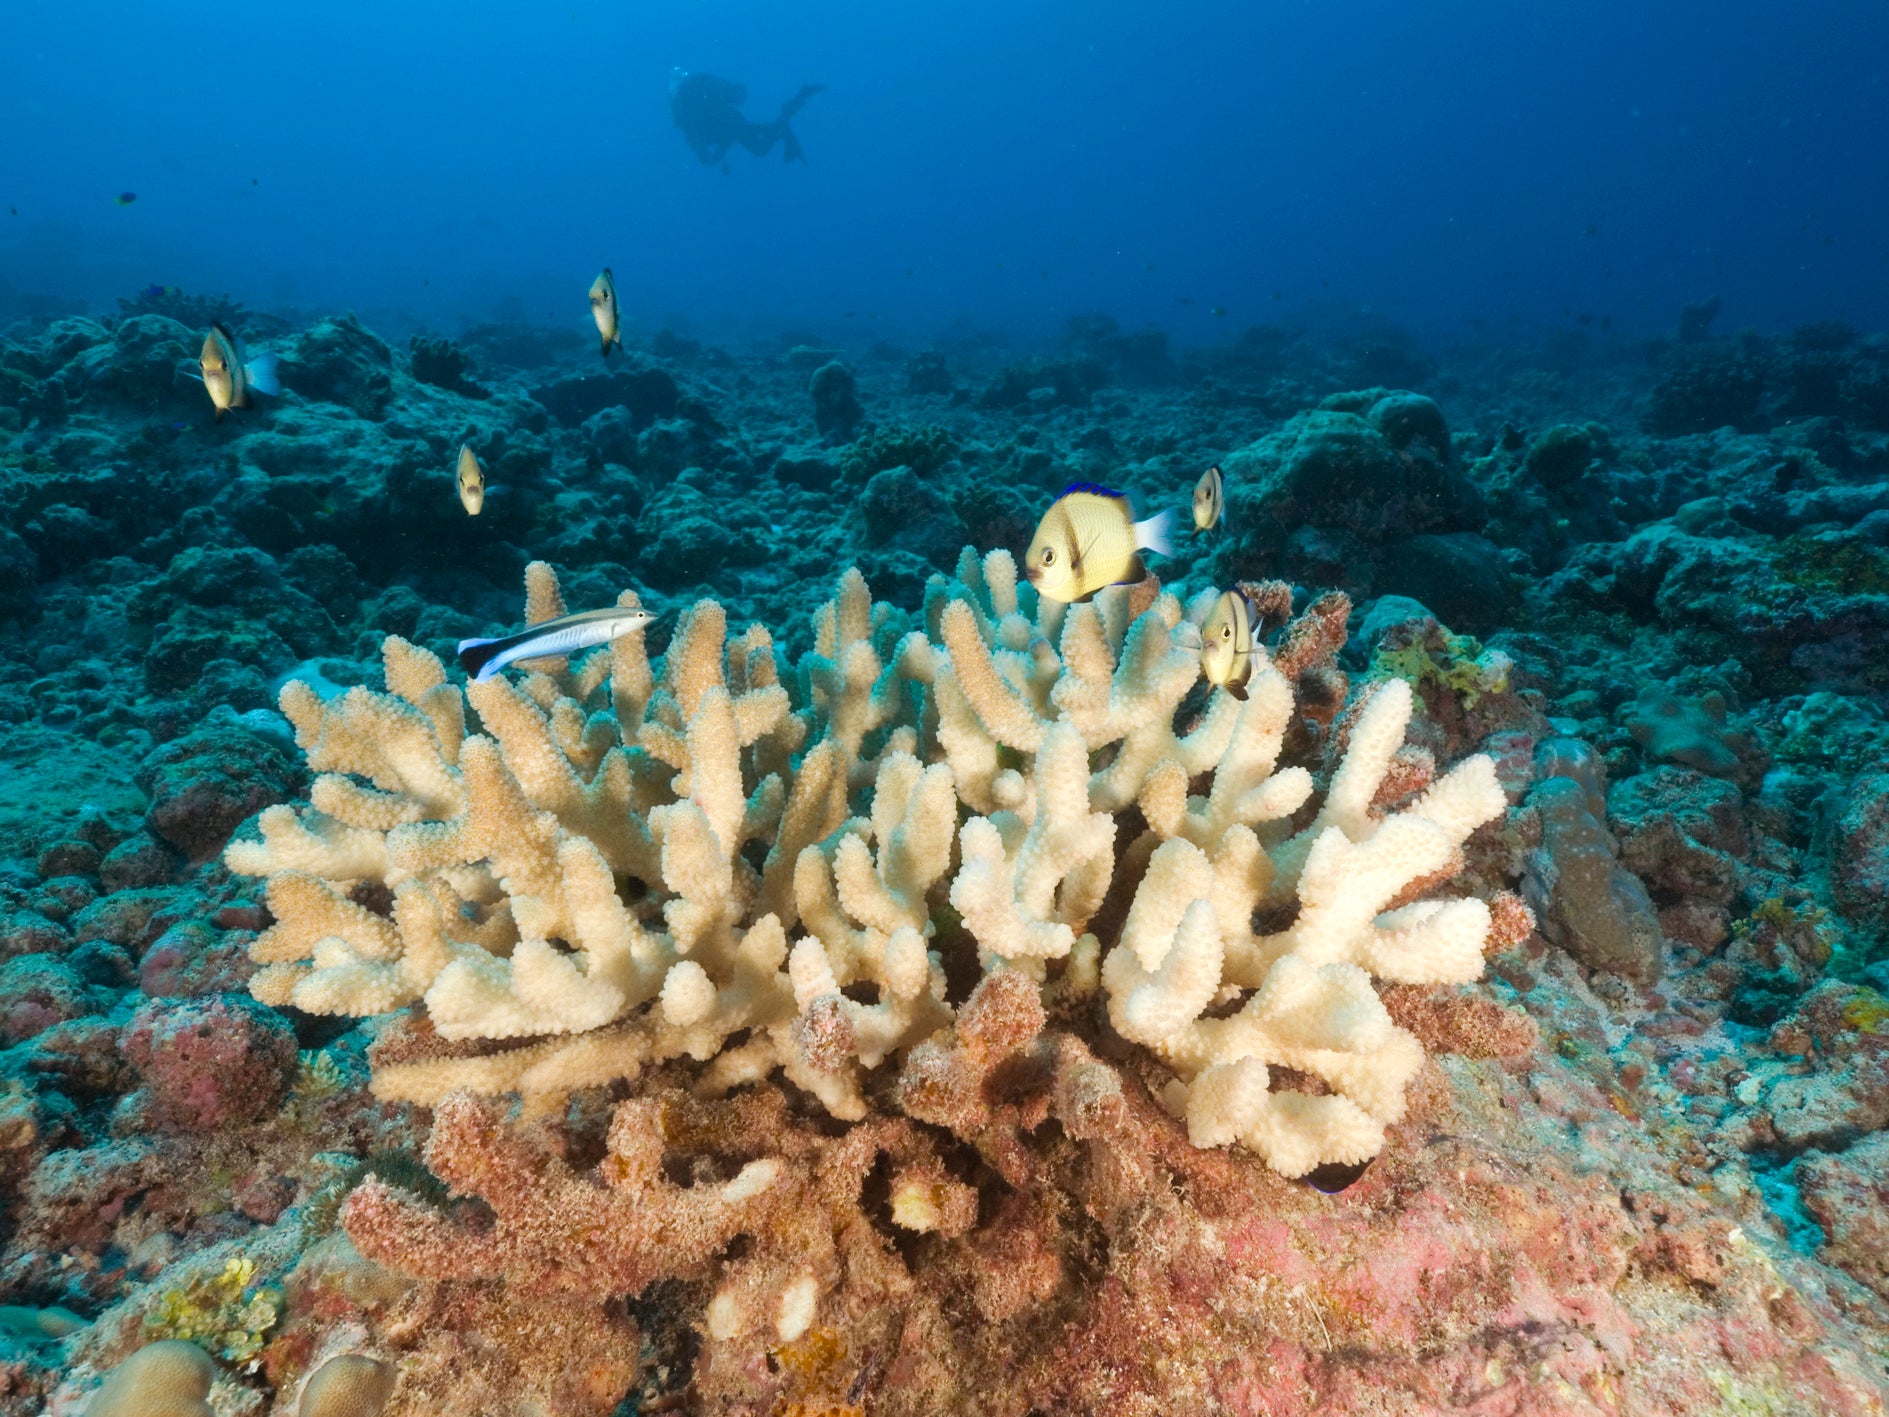 ‘Devastating’ bleaching of Great Barrier Reef hitting deep water corals harder than previously estimated, study shows